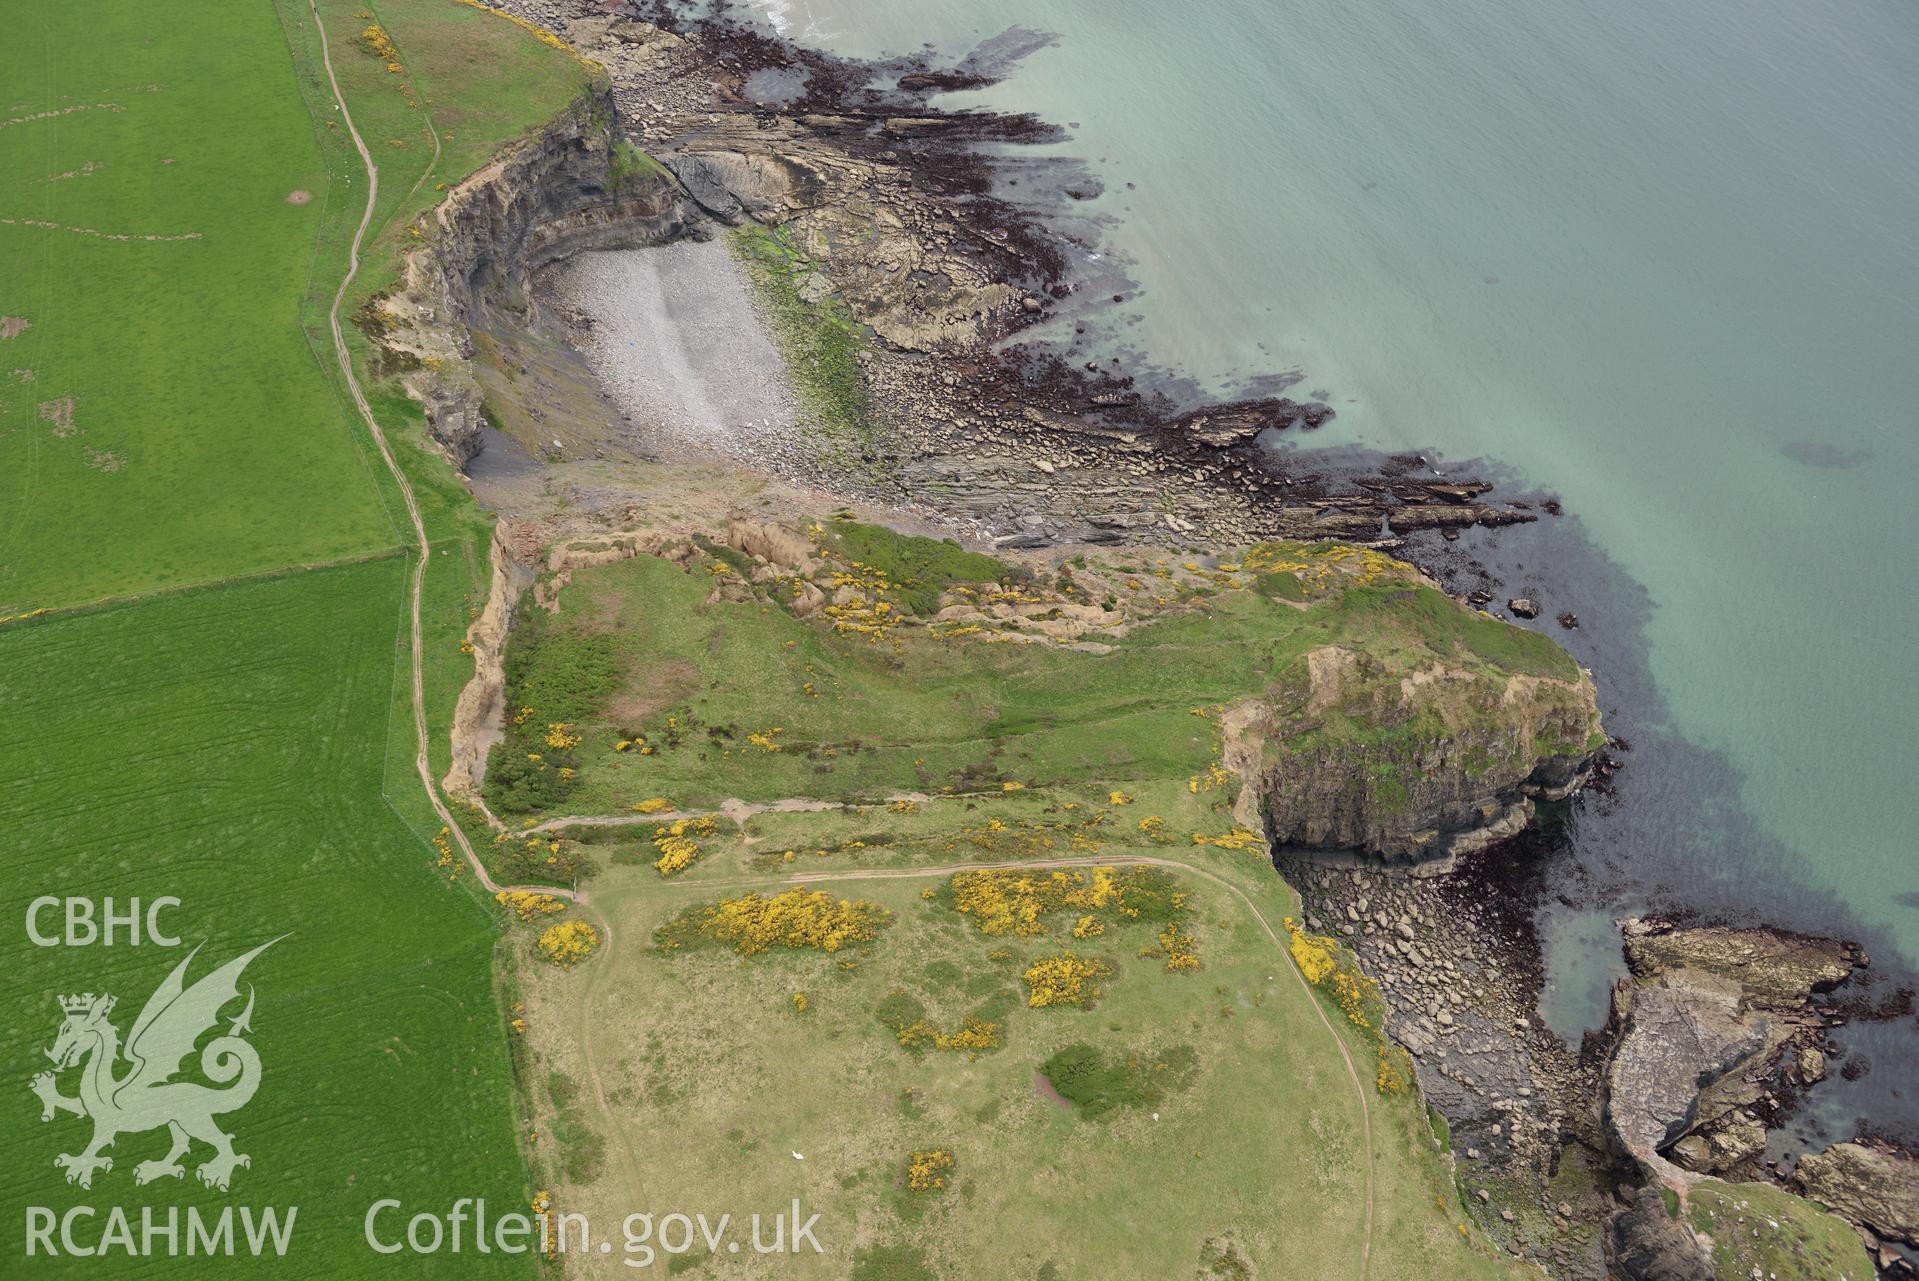 Black Point Rath coastal promontory fort. Baseline aerial reconnaissance survey for the CHERISH Project. ? Crown: CHERISH PROJECT 2017. Produced with EU funds through the Ireland Wales Co-operation Programme 2014-2020. All material made freely available through the Open Government Licence.